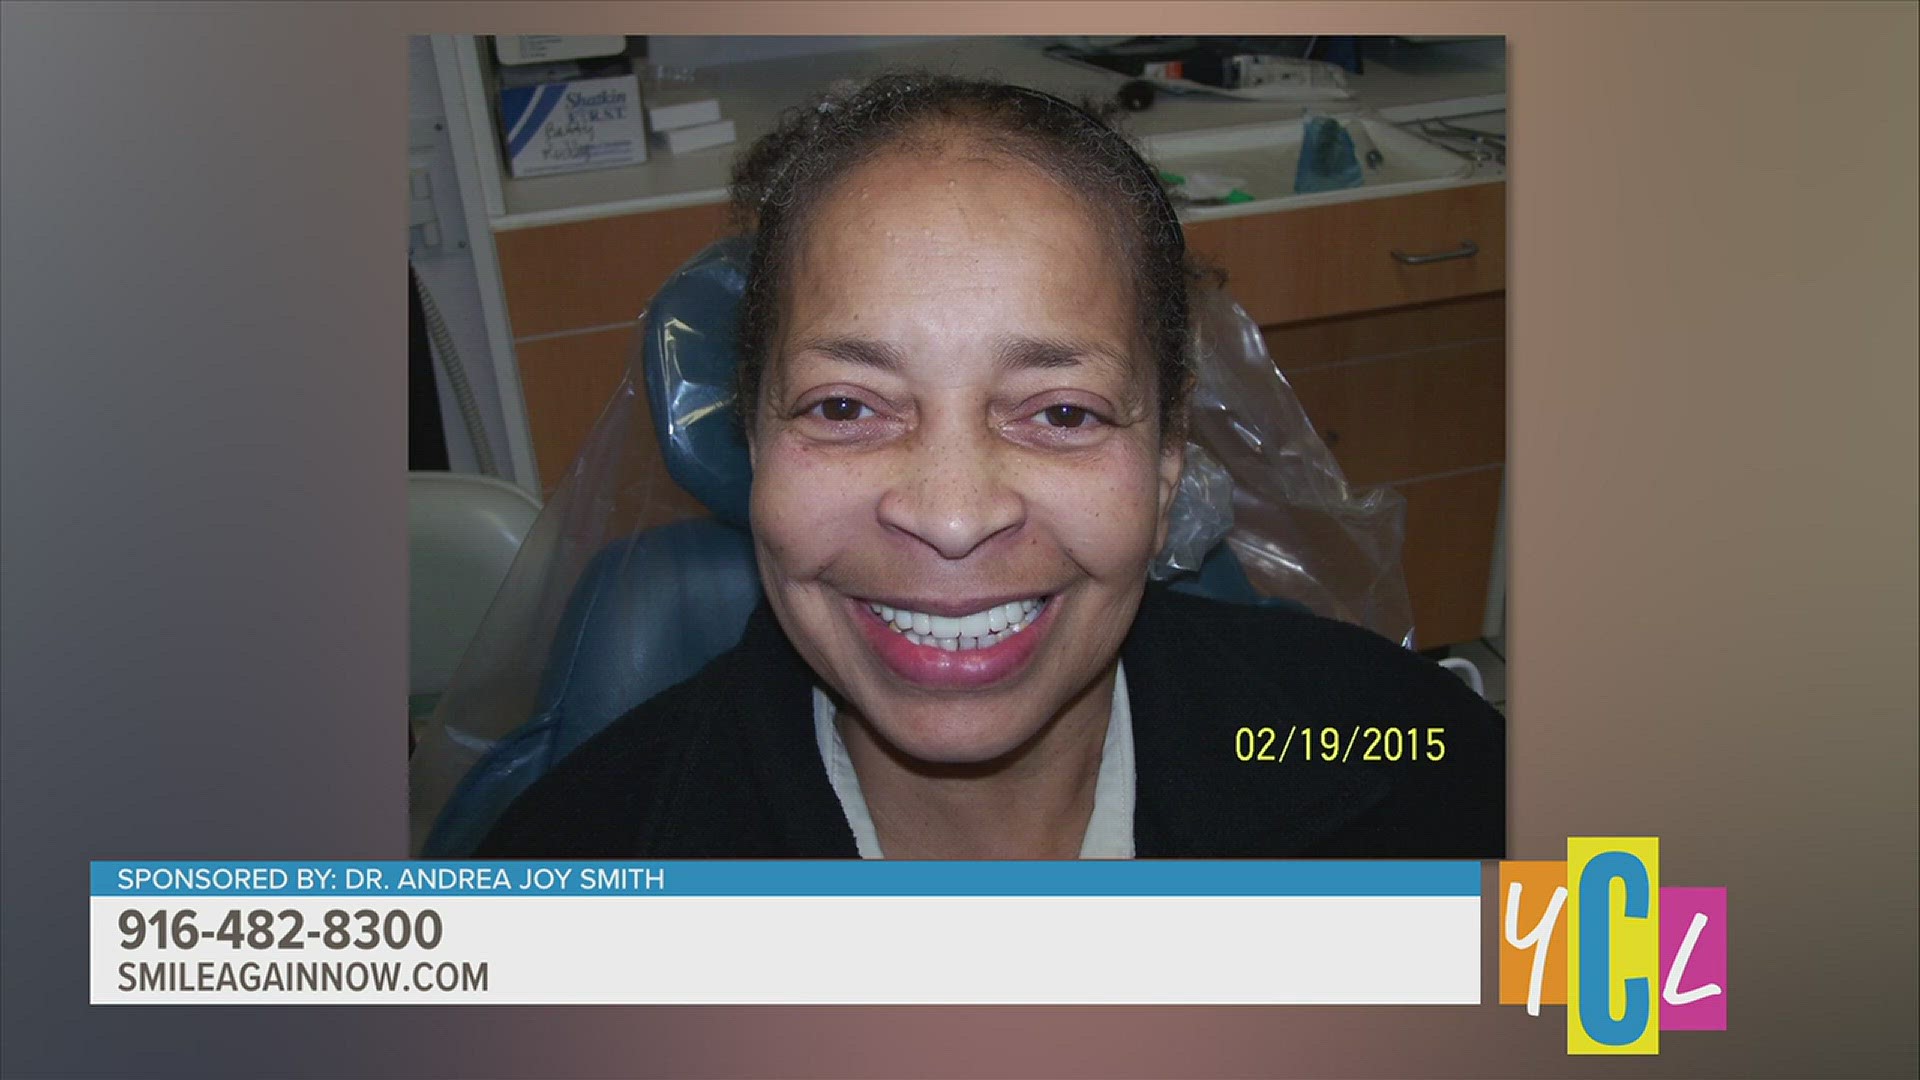 Learn about the advantage of one-piece mini dental implants to help solve common dental problems. This segment is paid for by Dr. Andrea Joy Smith.